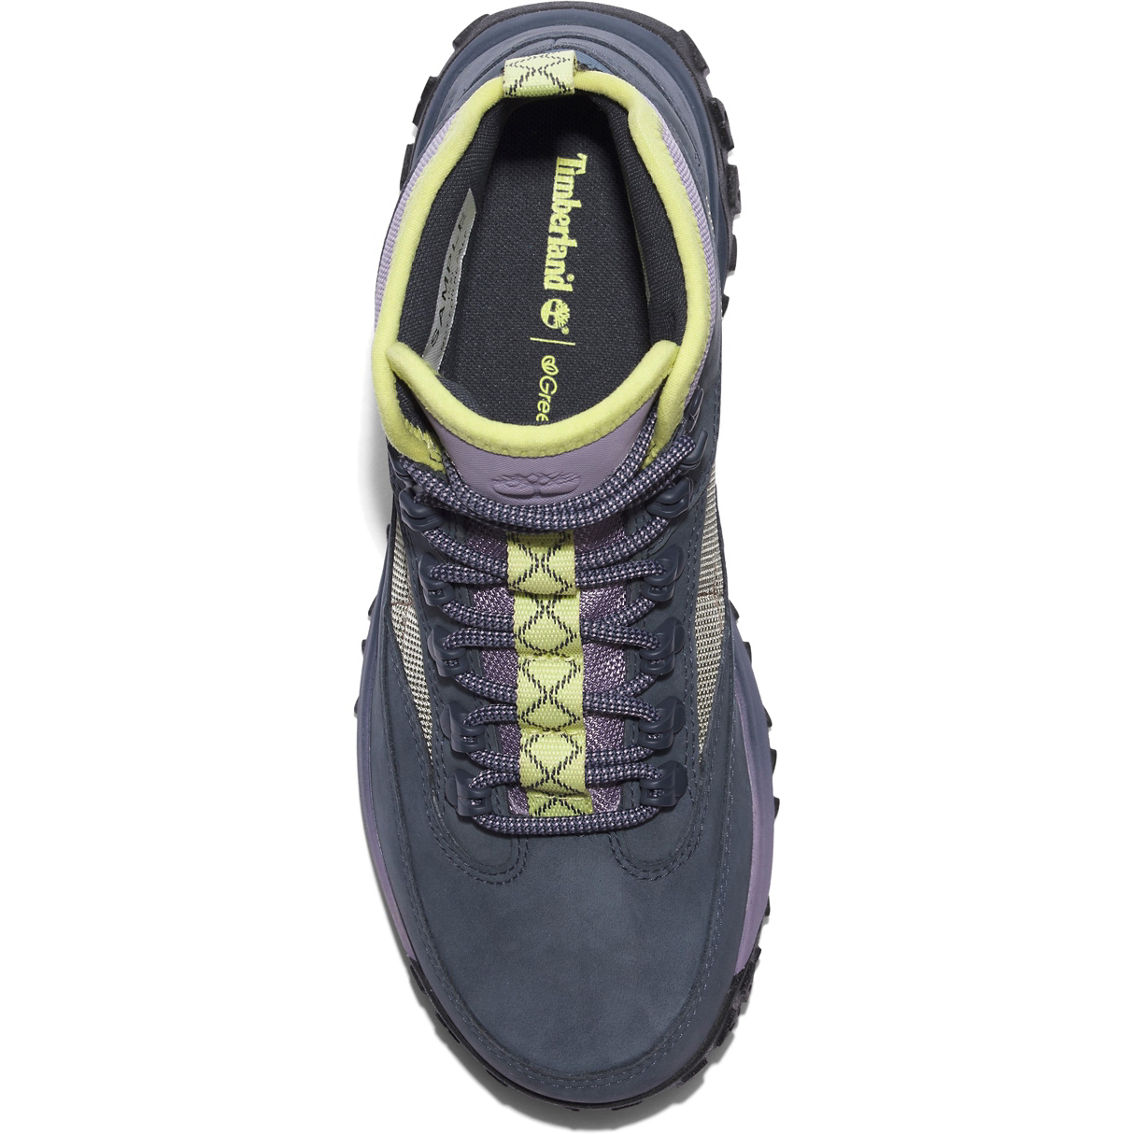 Timberland Women's GreenStride Motion 6 Waterproof Hiking Boots - Image 3 of 5